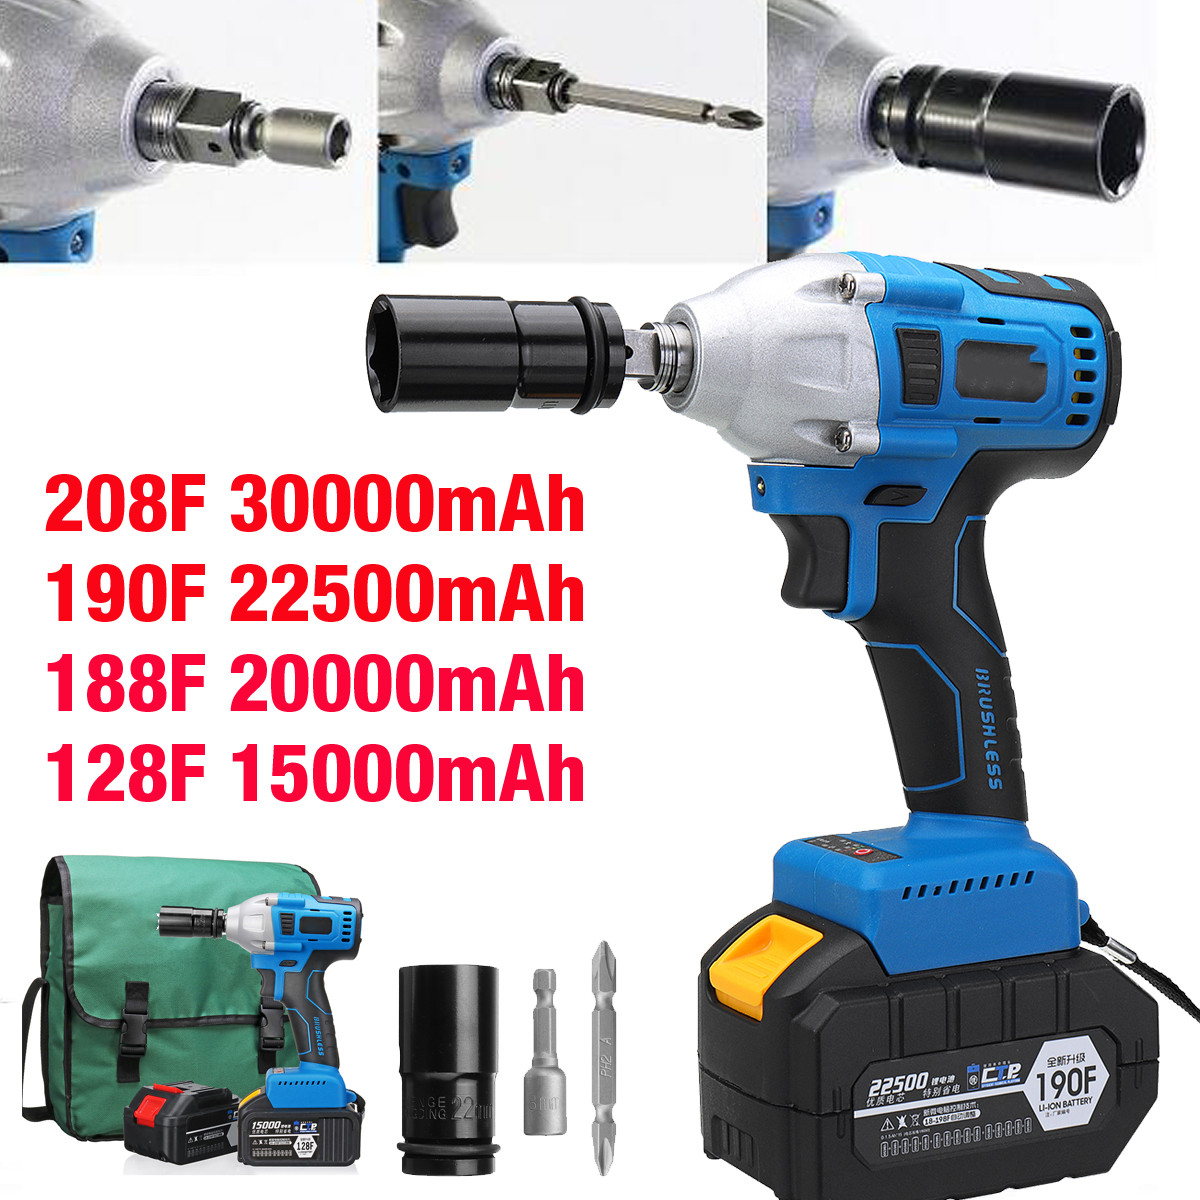 15000200002250030000-mAh-12-Inch-Cordless-Brushless-Electric-Impact-Wrench-Screwdriver-kit-with-2-Li-1413886-2